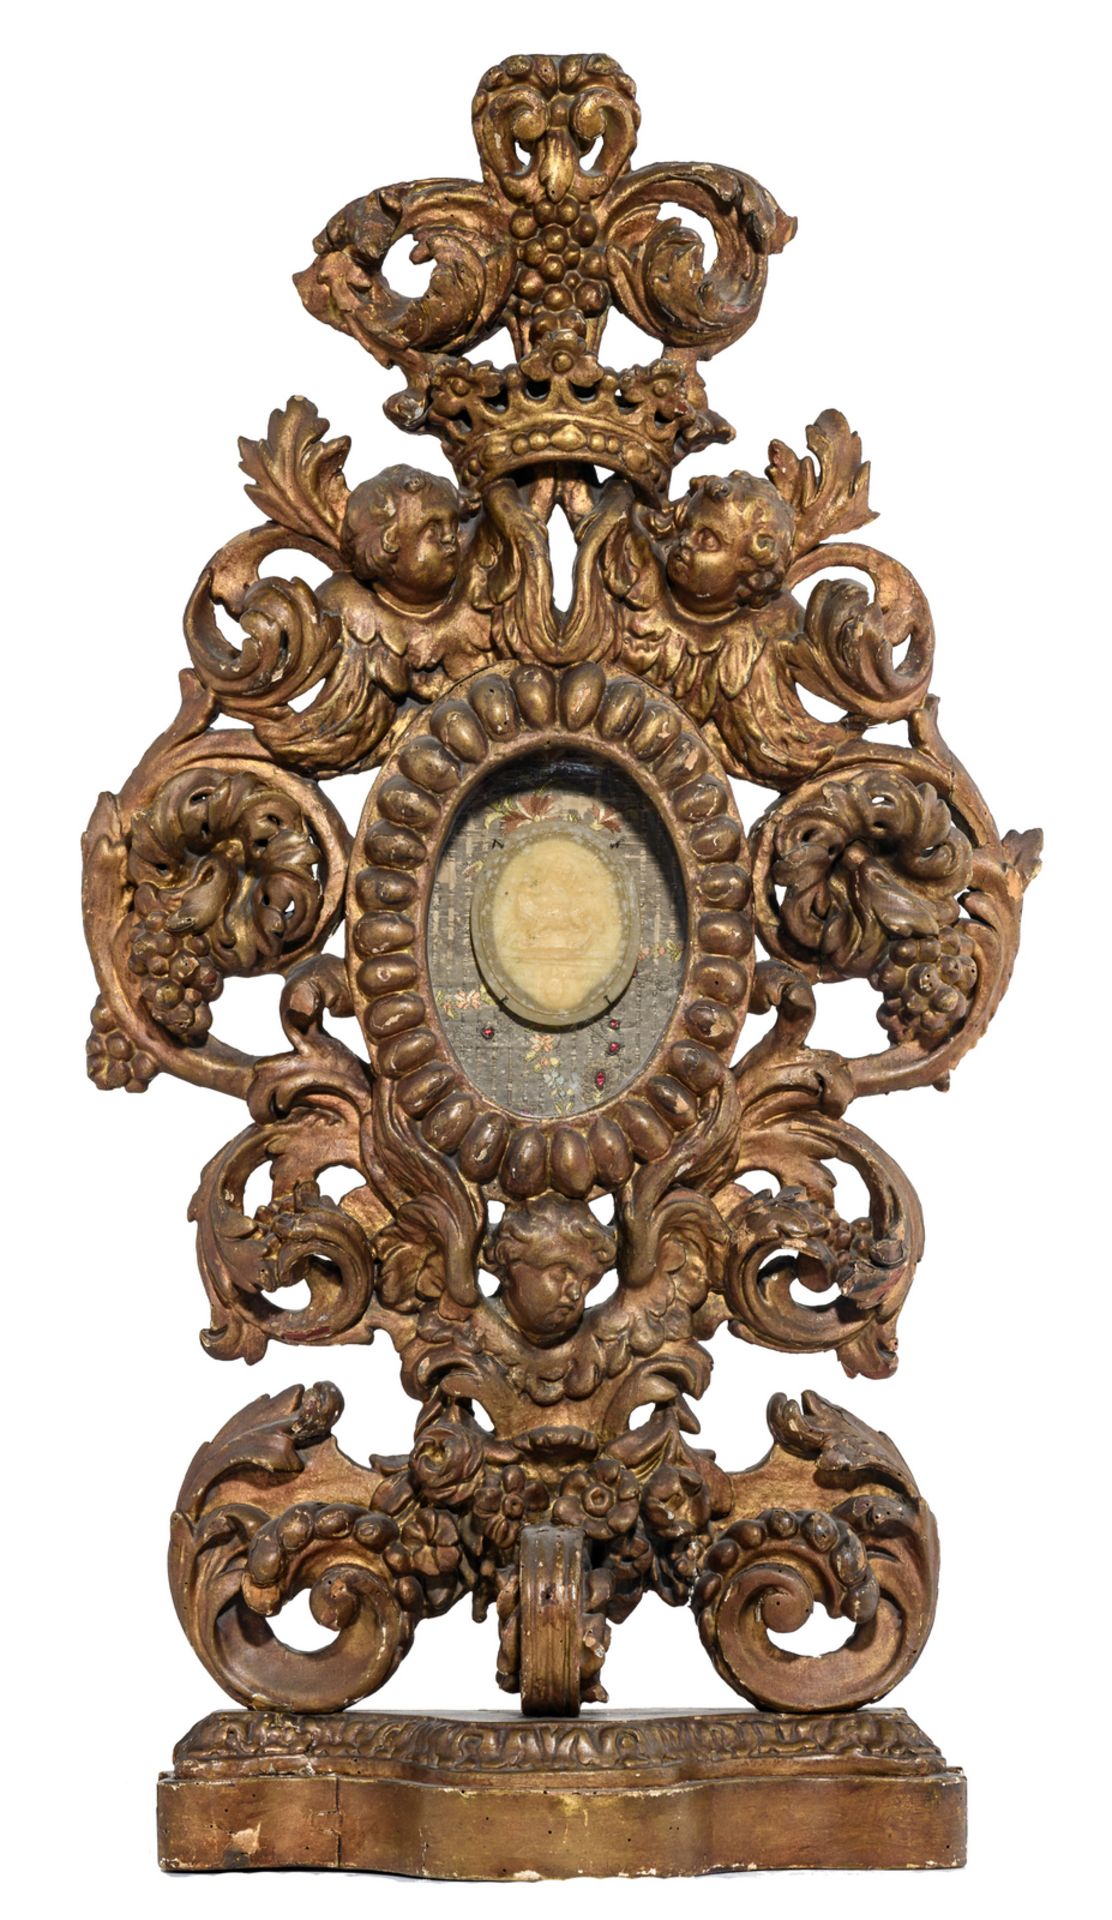 A late 17th - early 18thC gilt limewood reliquary with a wax relief of the Mystic Lamb, H 77 cm